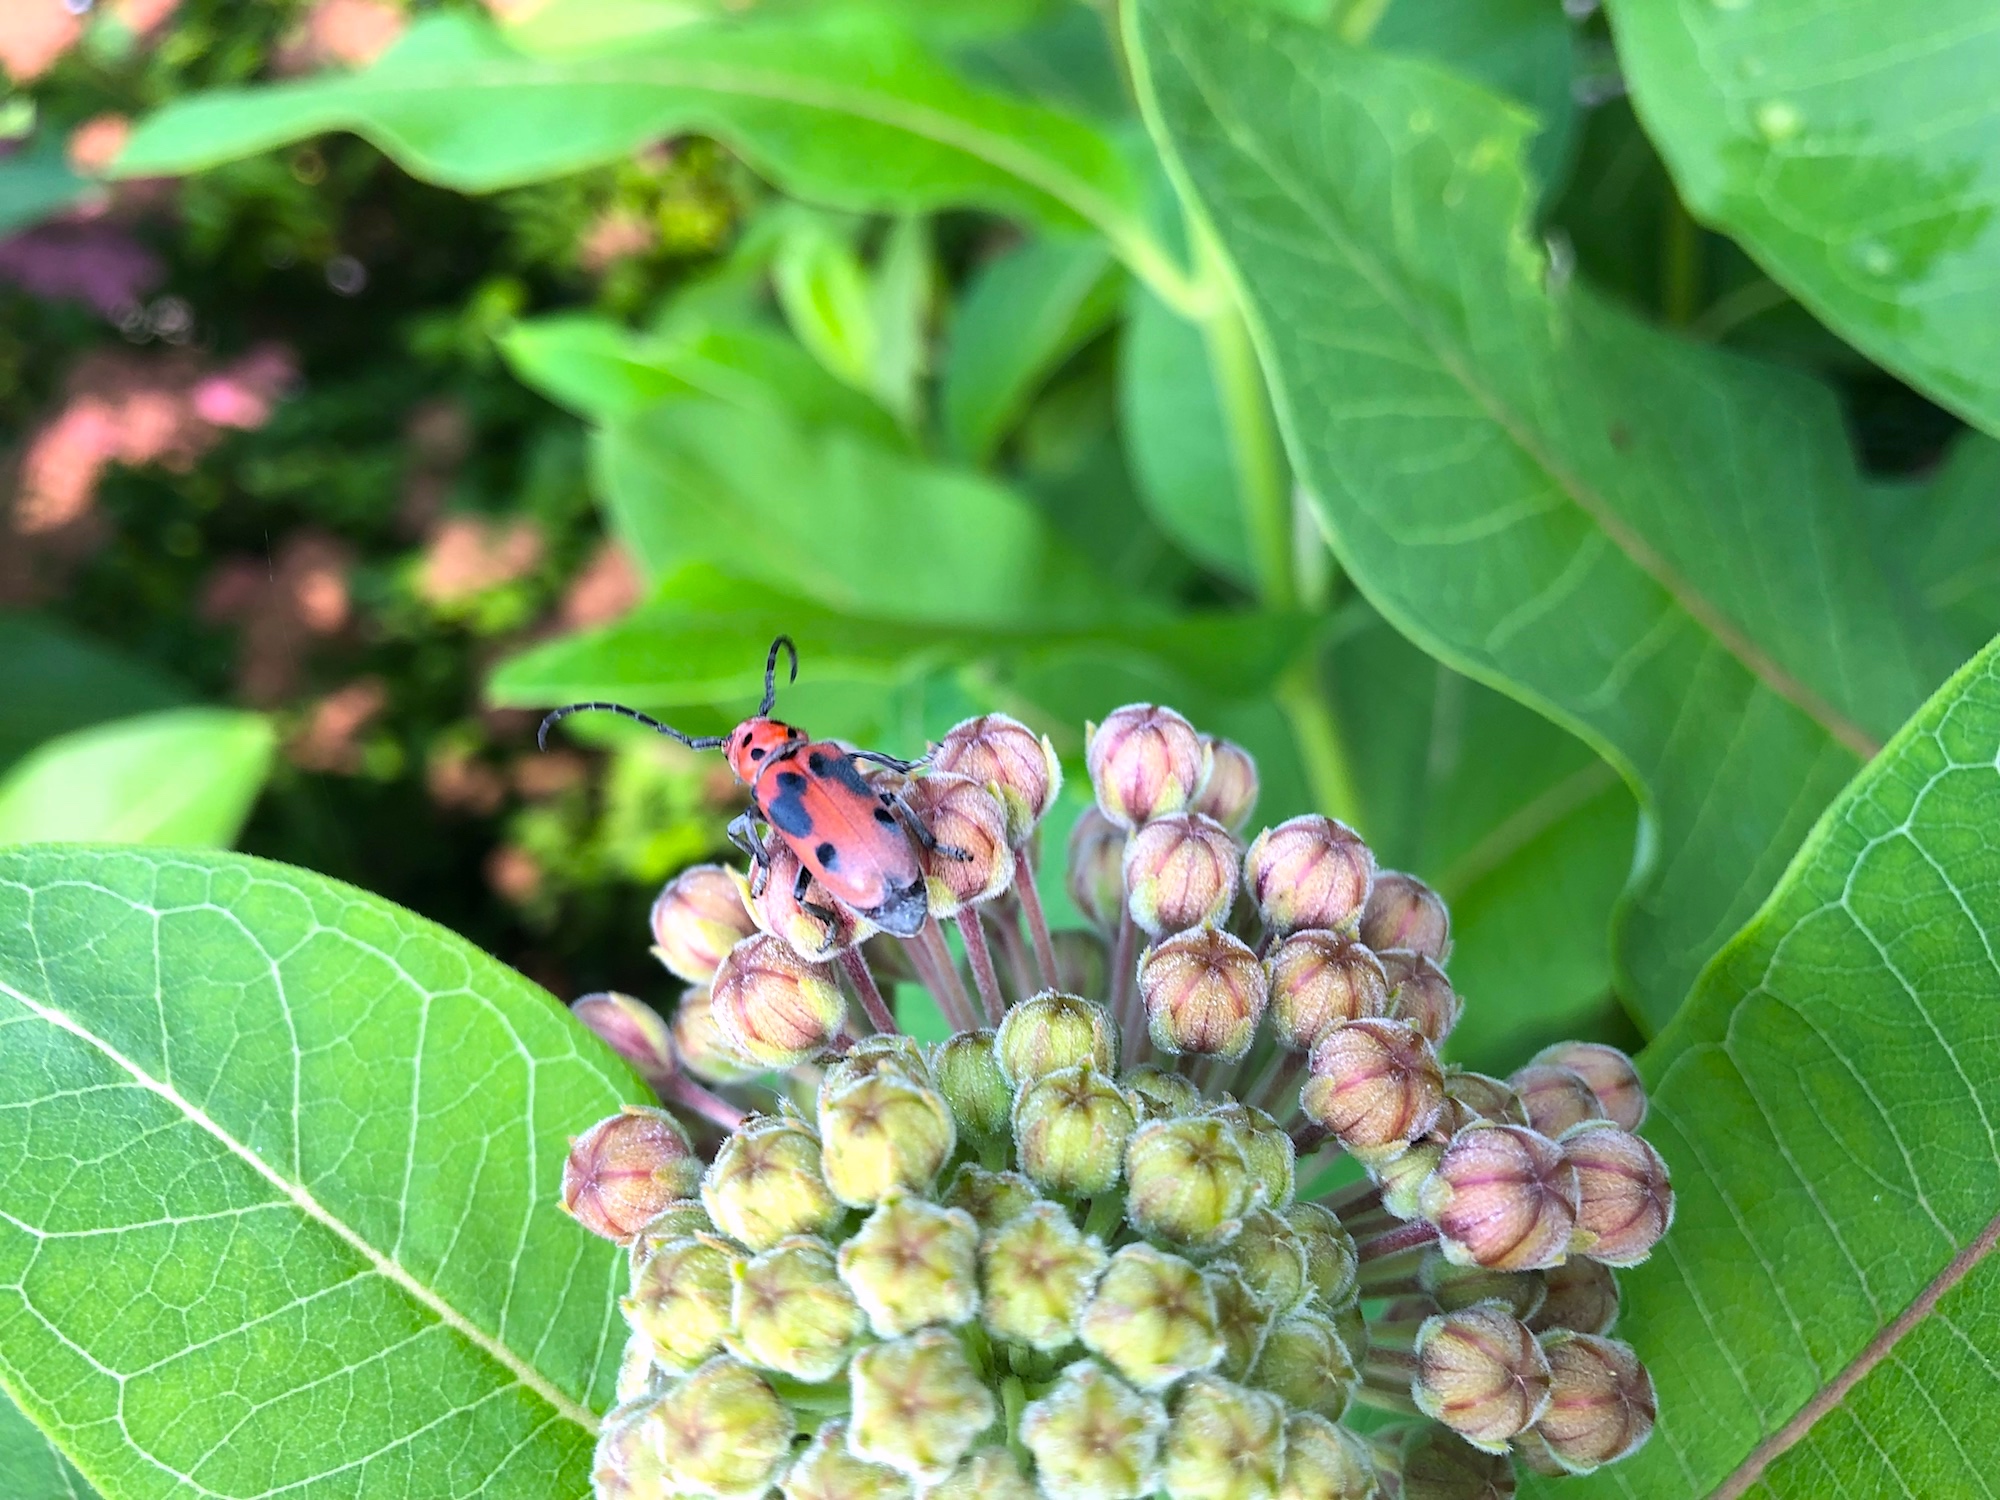 Common Milkweed with Goldenrod Soldier Beetle by Lake Wingra Boat House on June 30, 2019.